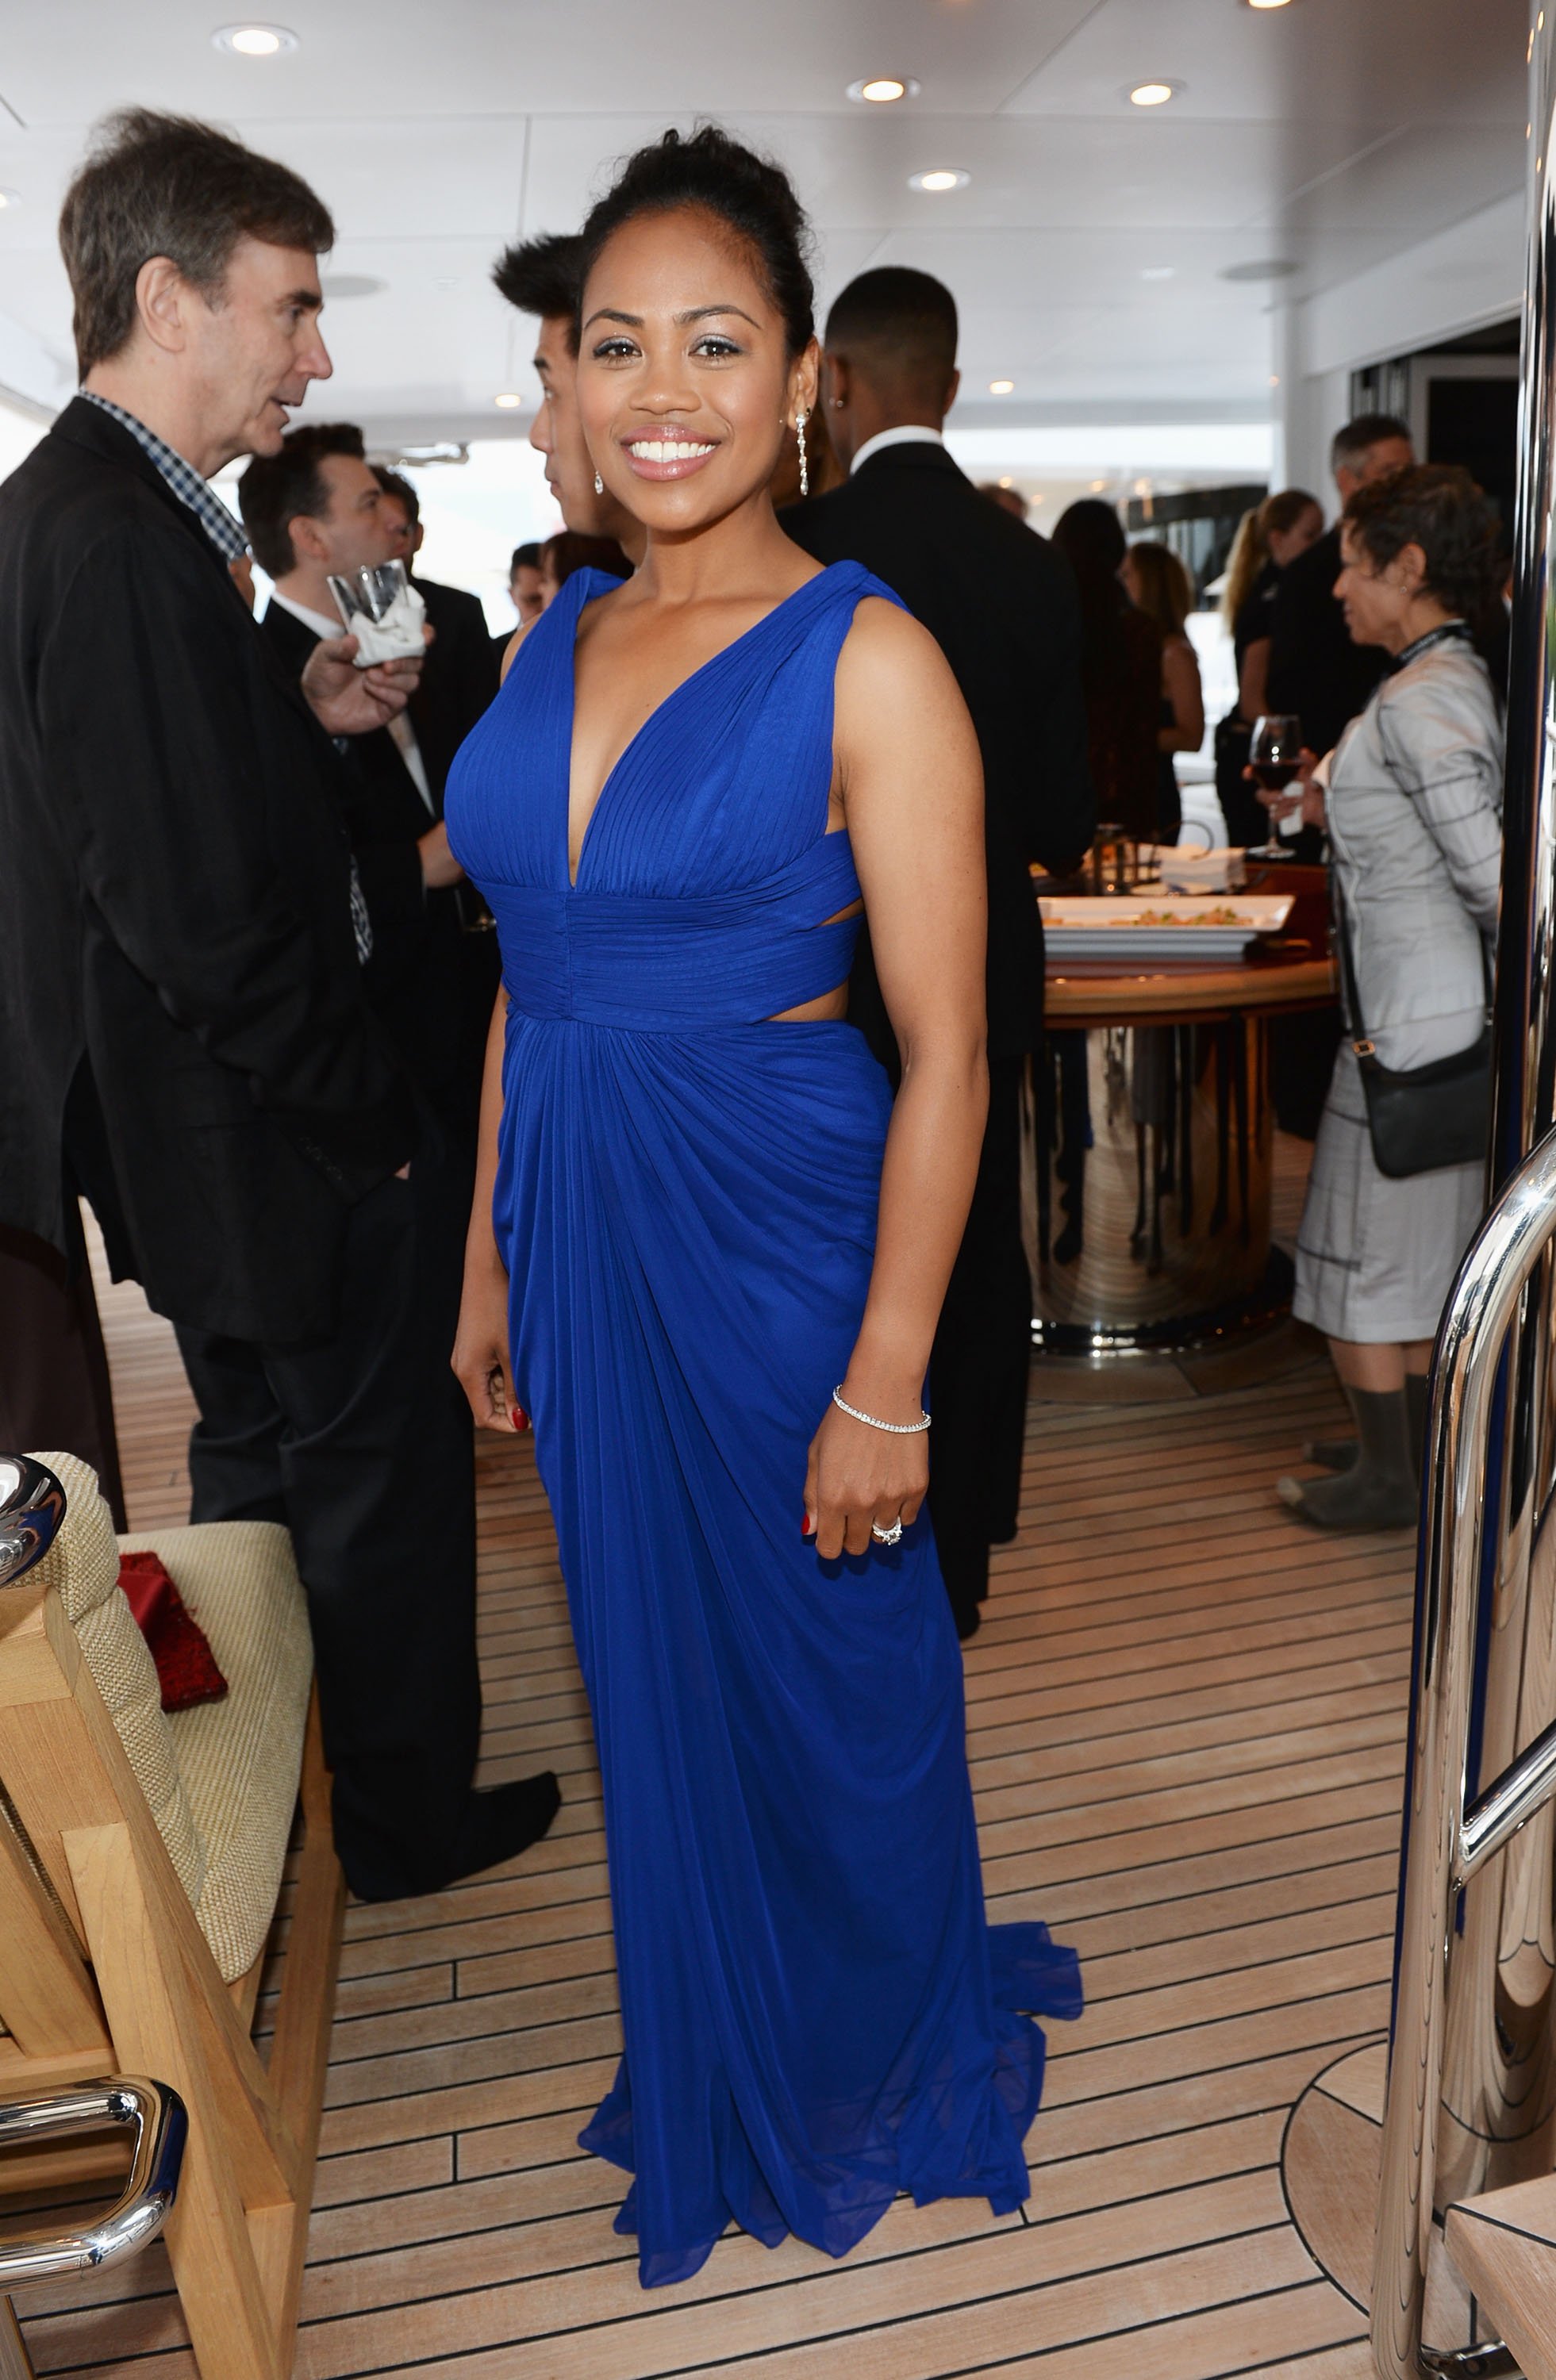 Zinzi Evans attends the Fruitvale Station Cannes screening dinner at Harle Yacht on May 16, 2013, in Cannes, France. | Source: Getty Images